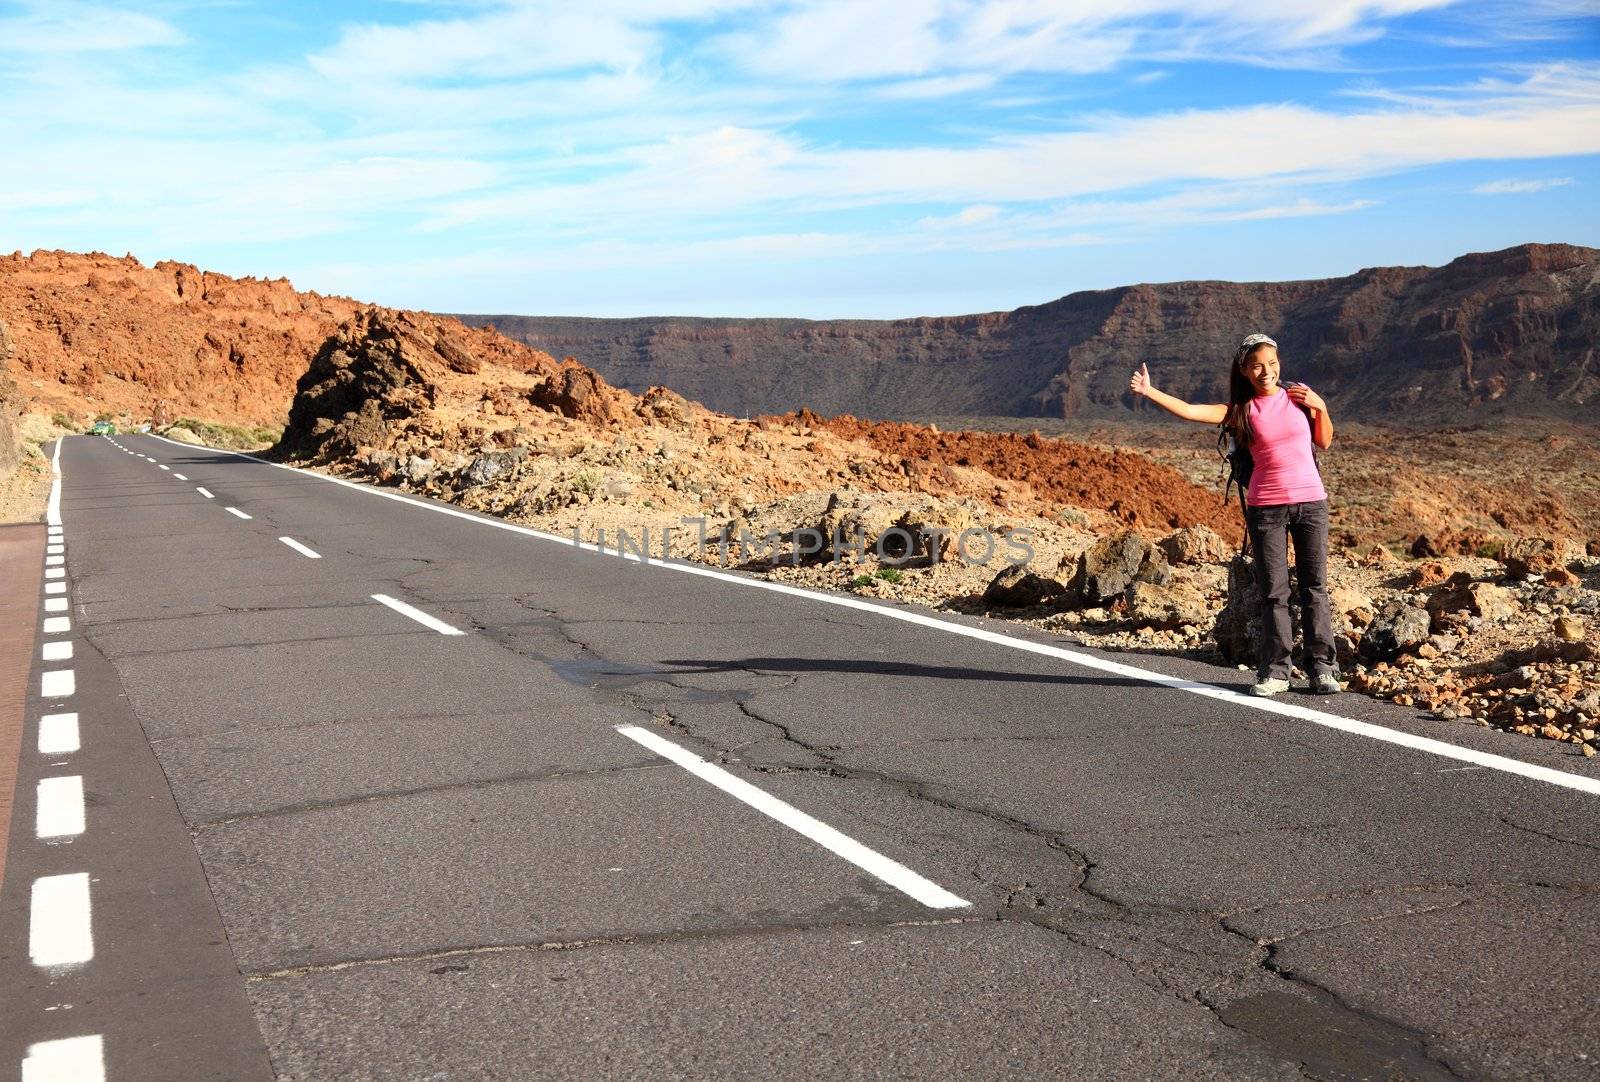 Woman Backpacking / Hitchhiking on Teide, Tenerife. Mixed chinese / caucasian model.